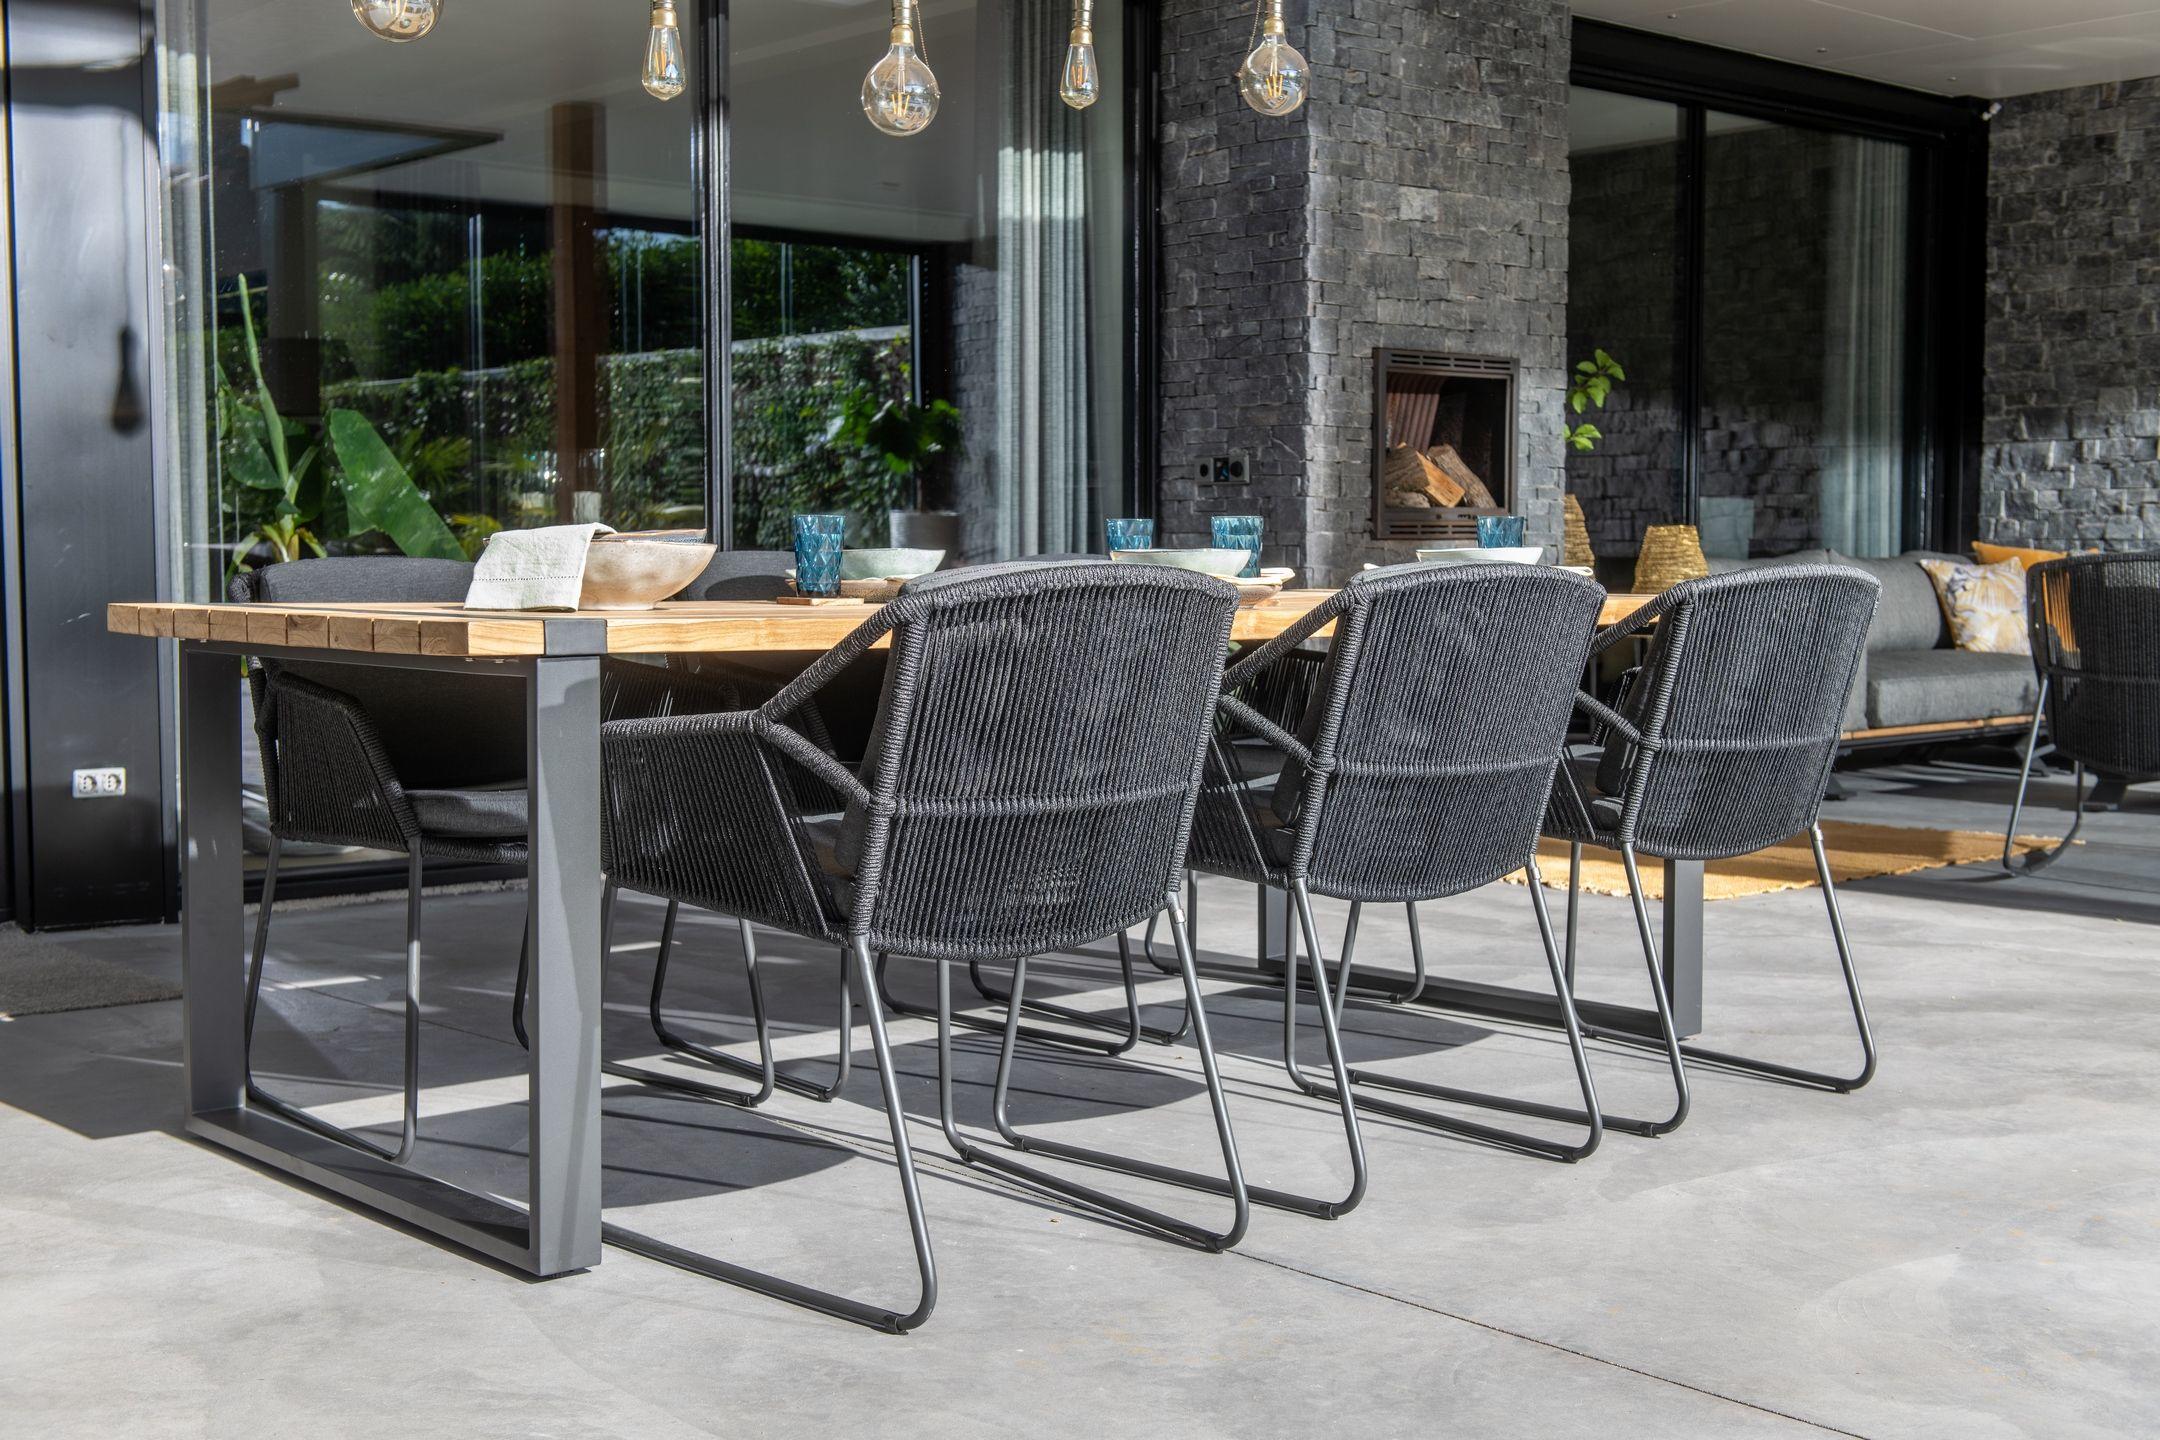 garden rope weave dining chairs with 240 cm large teak and aluminium modern garden dining table